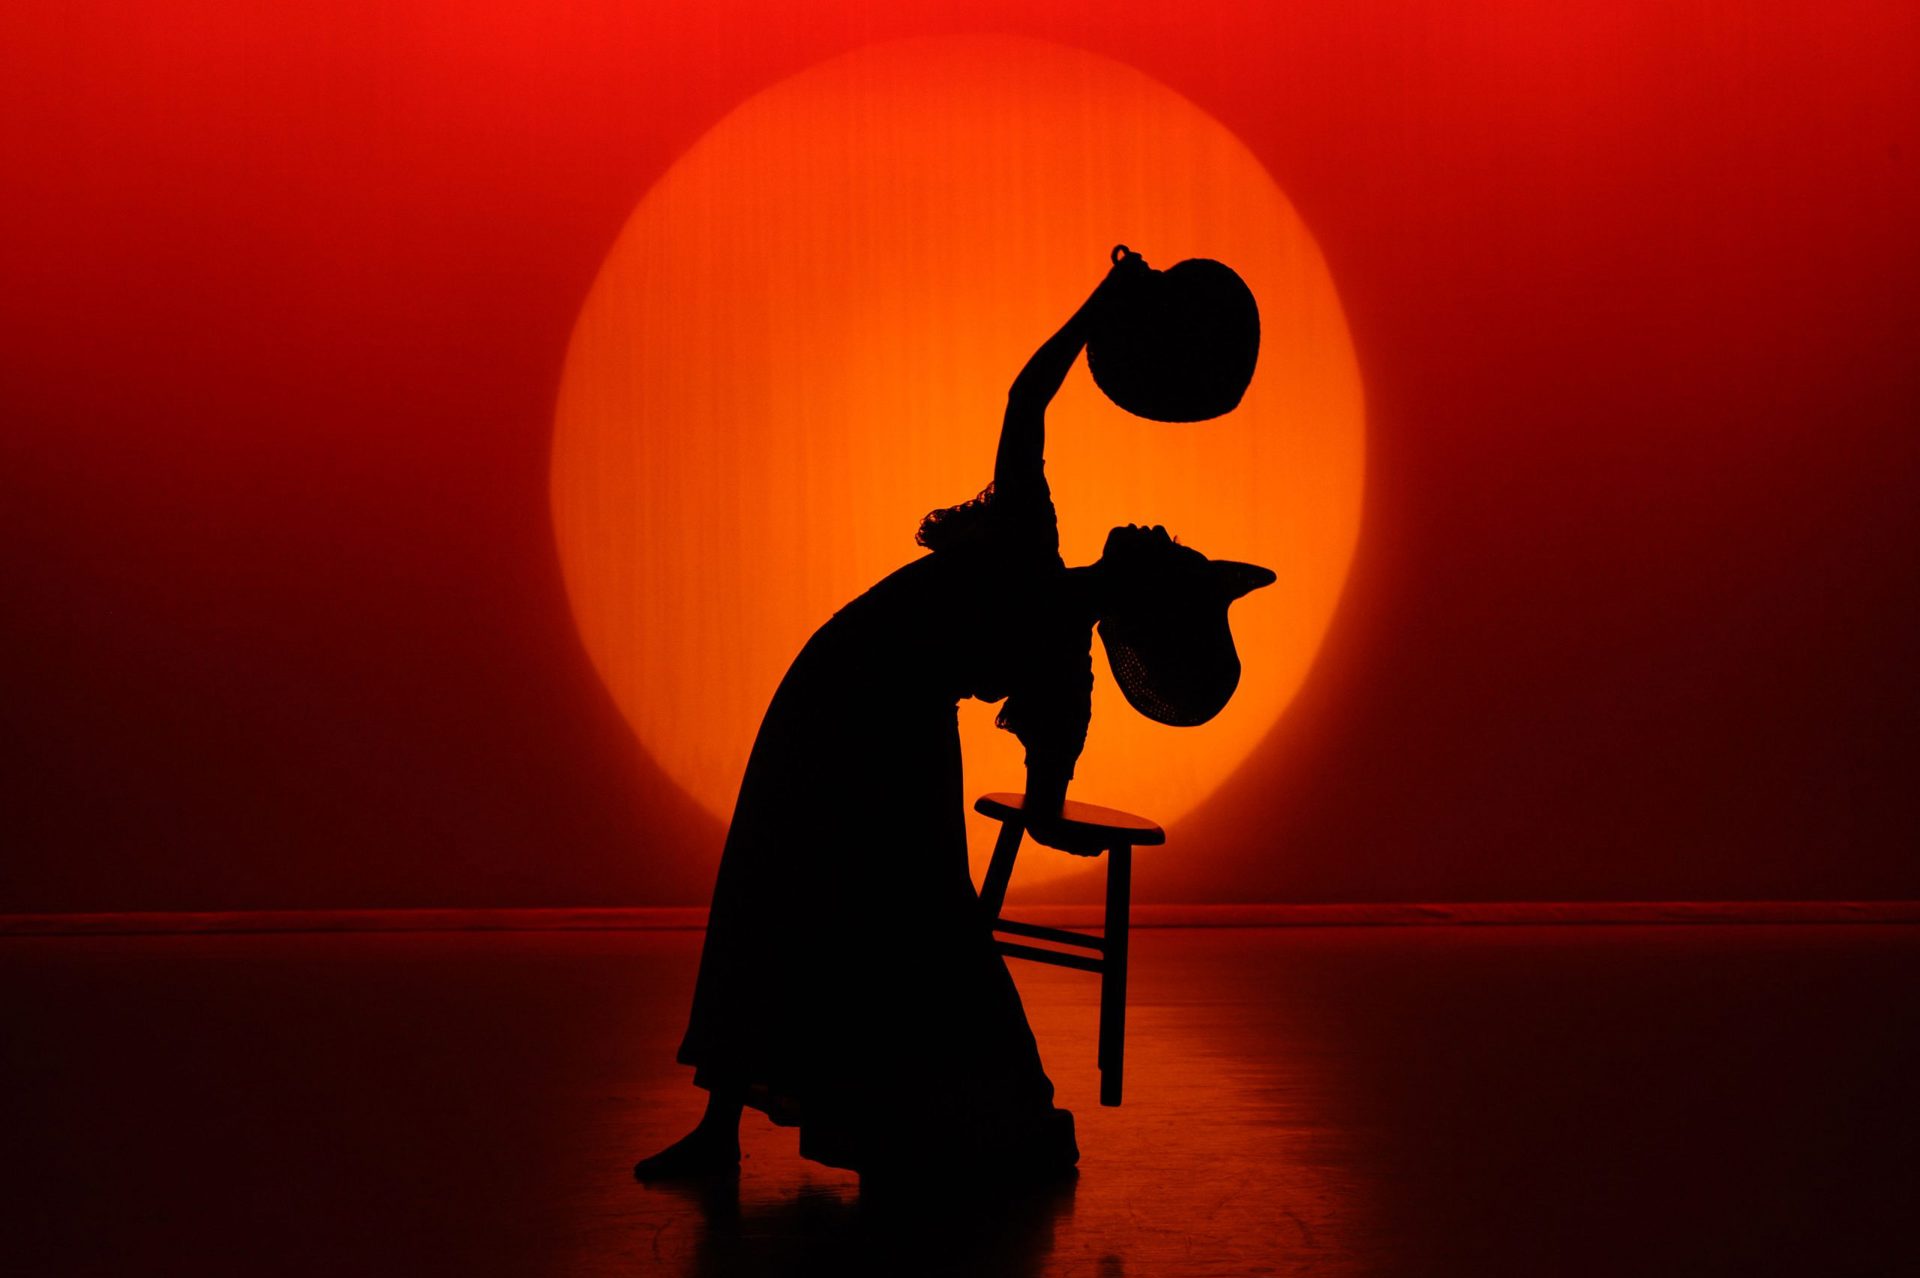 silhouette of dancer doing a backbend holding a tool with one hand and arching over waving a fan to the face wearing a large hat. In front of large orange circle and red background